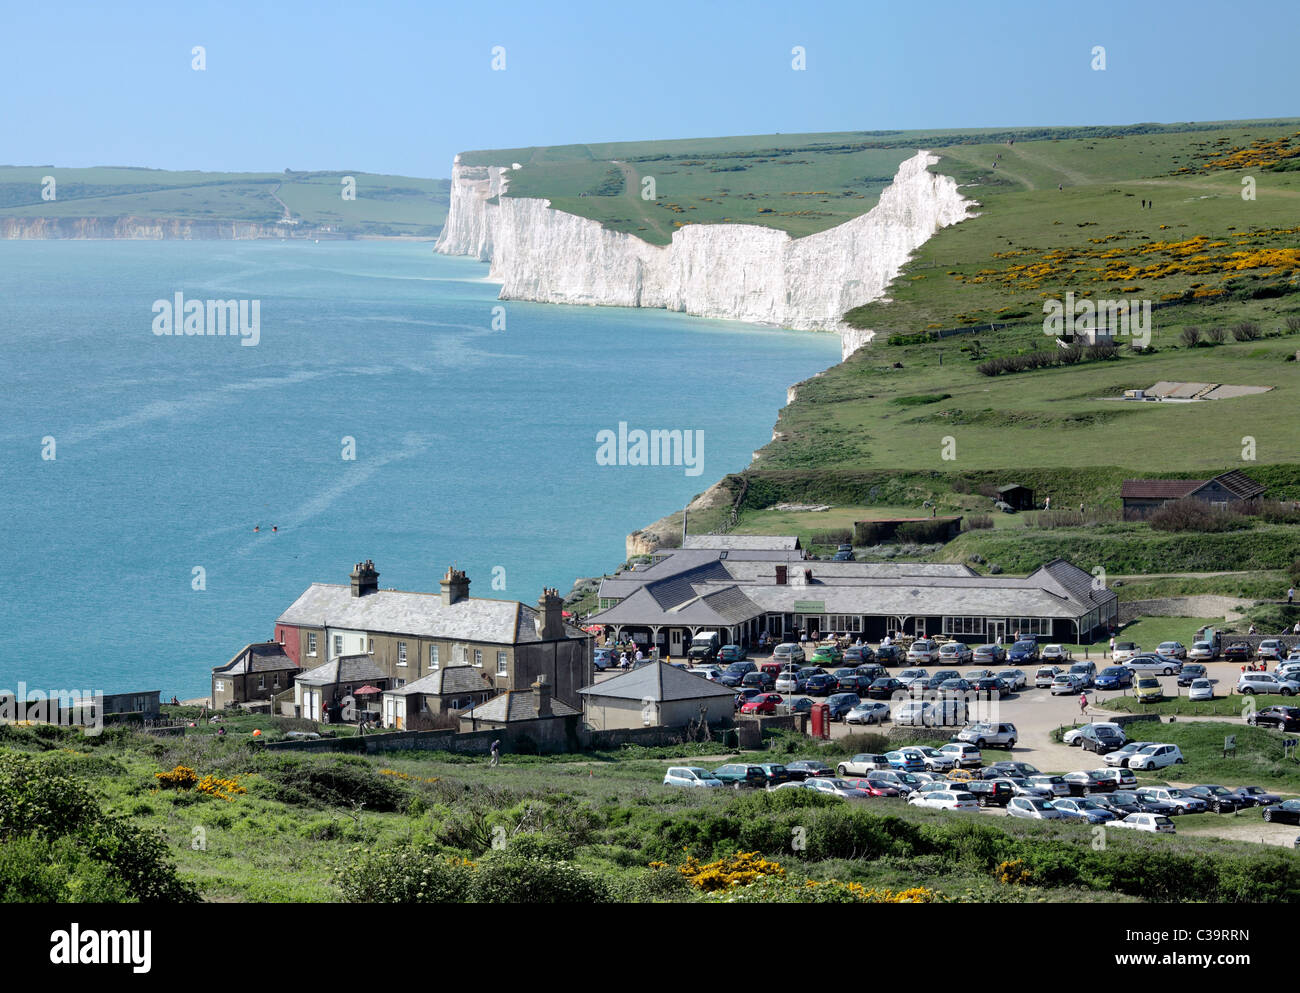 Birling Gap, between the Seven Sisters cliffs (background) and Beachy Head, East Sussex. Part of the South Downs National Park. Stock Photo